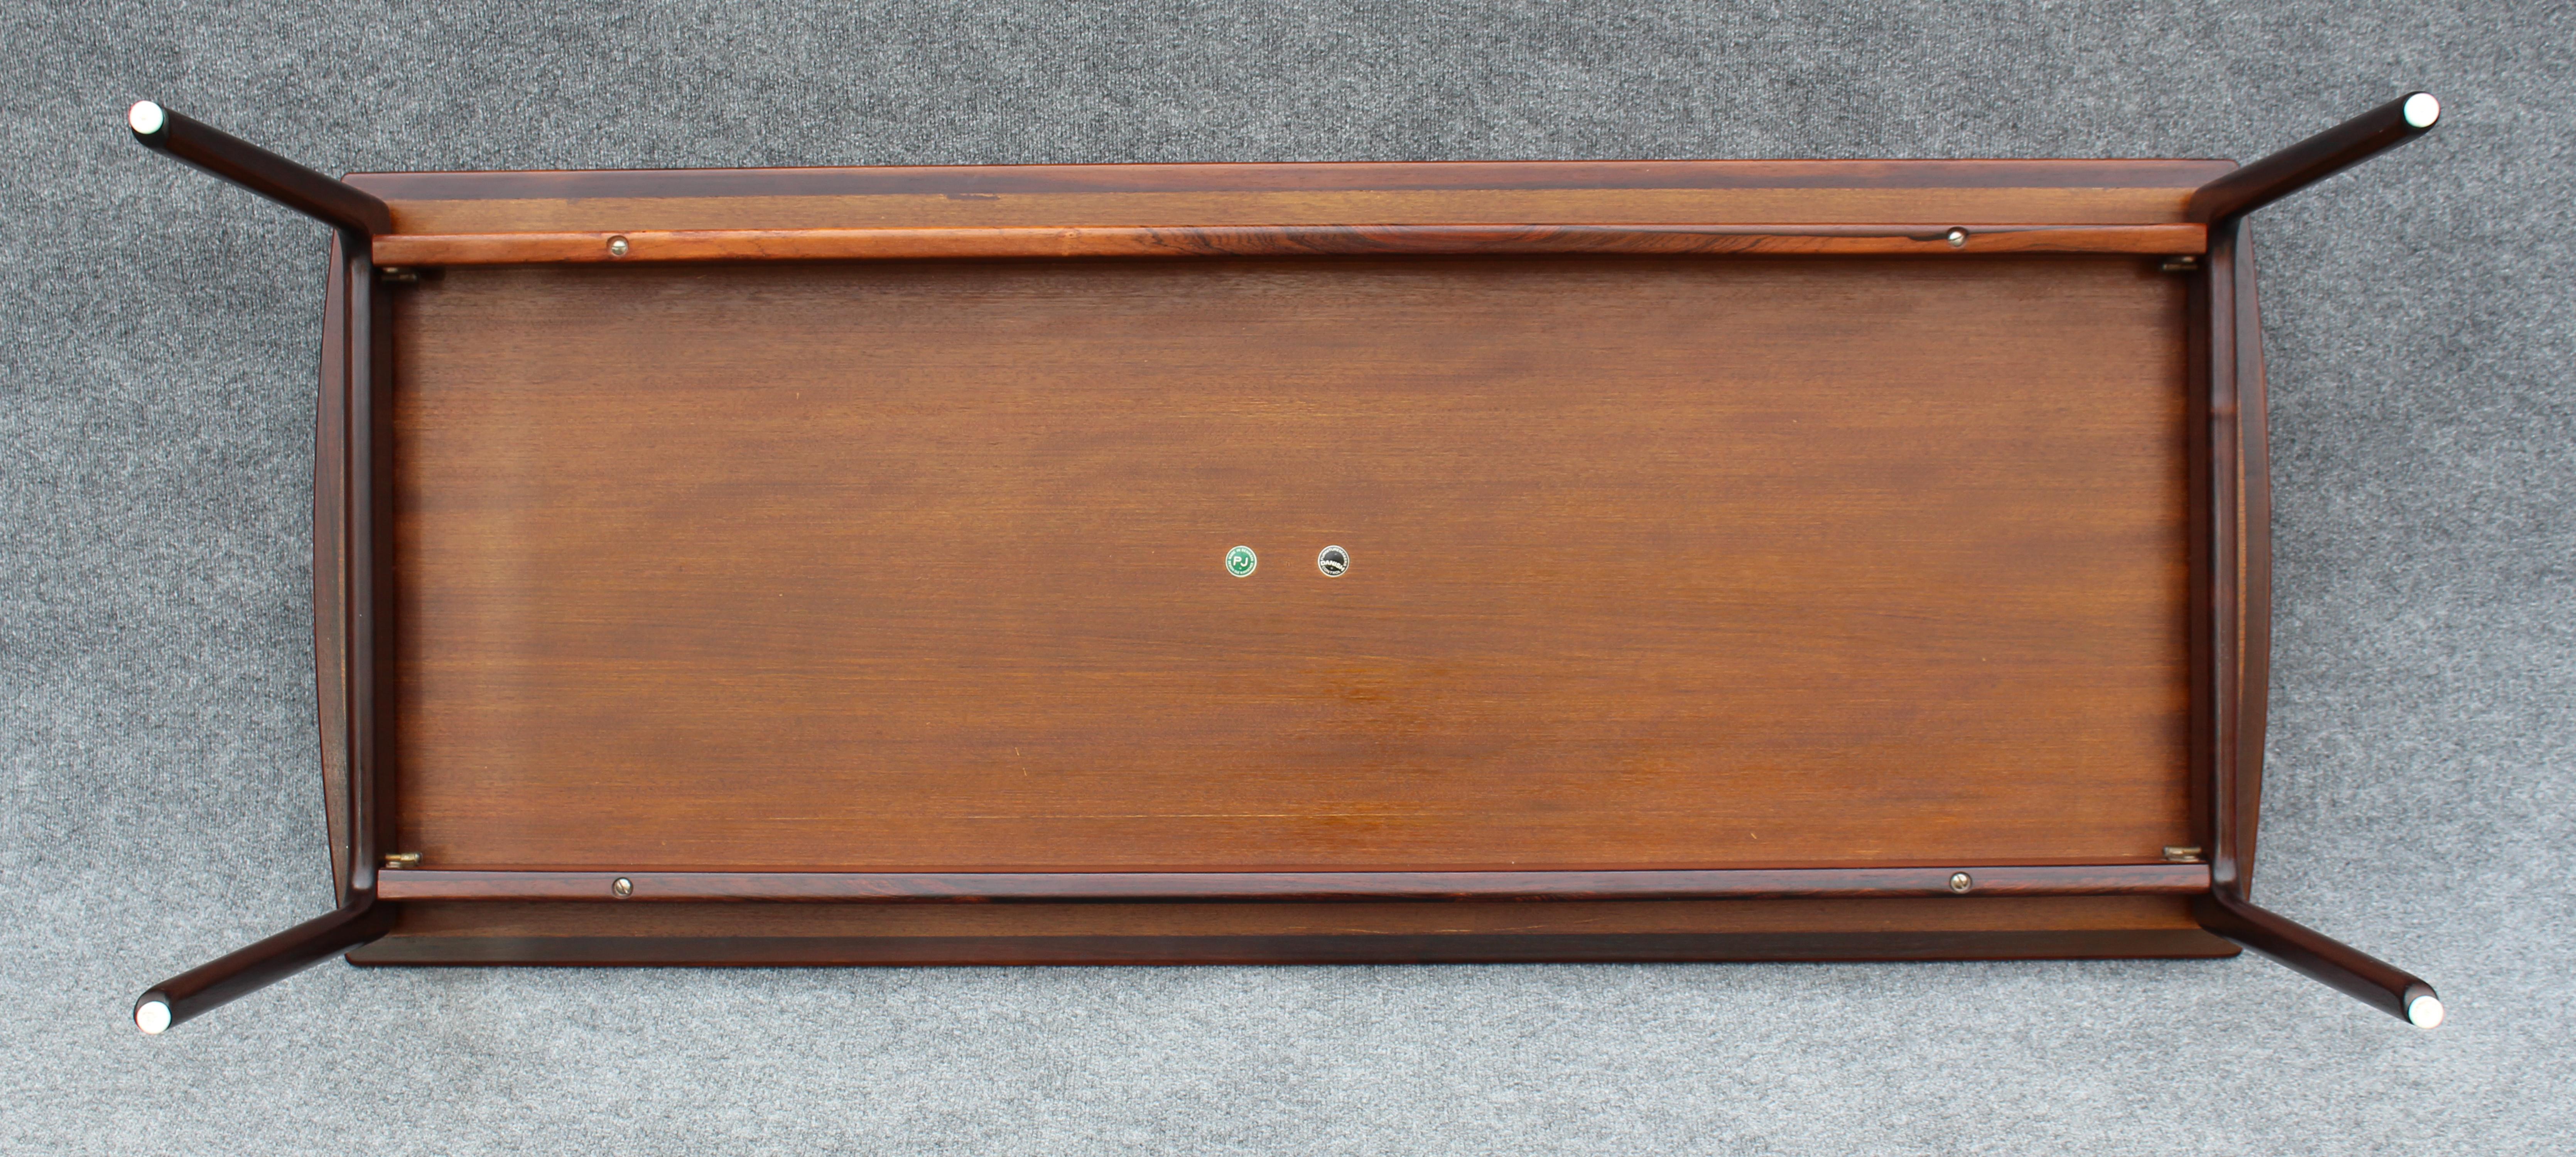 Fully Restored & Rare Ole Wanscher Floating Top Rosewood Coffee Table 1960s For Sale 11